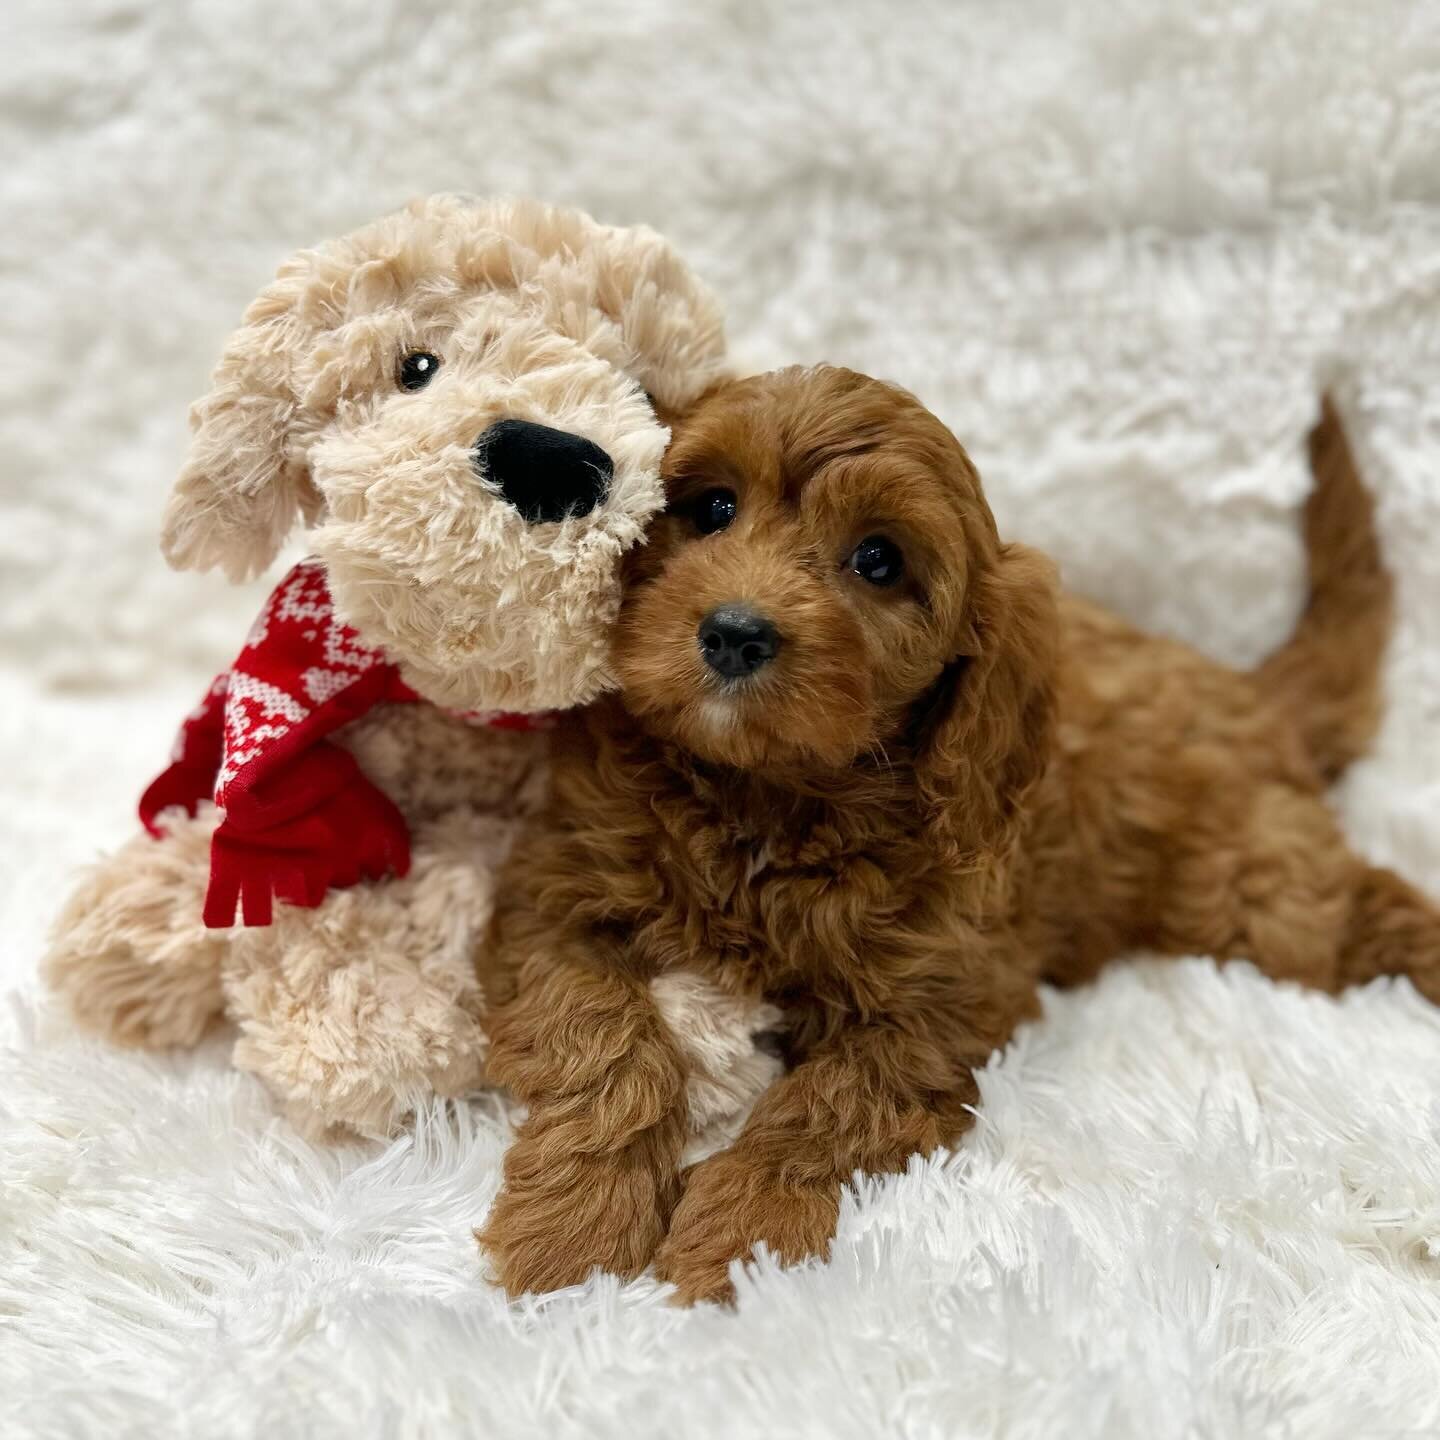 FUN FACT 🌟 @tescofood Curtis the Cavapoo was inspired by a Rosedale Doodles Cavapoo 🌟 Teddy, owned by @iamkb, has appeared in every Christmas campaign for @fandfclothing since he went to his forever home in 2020 and even inspired their Curtis the C